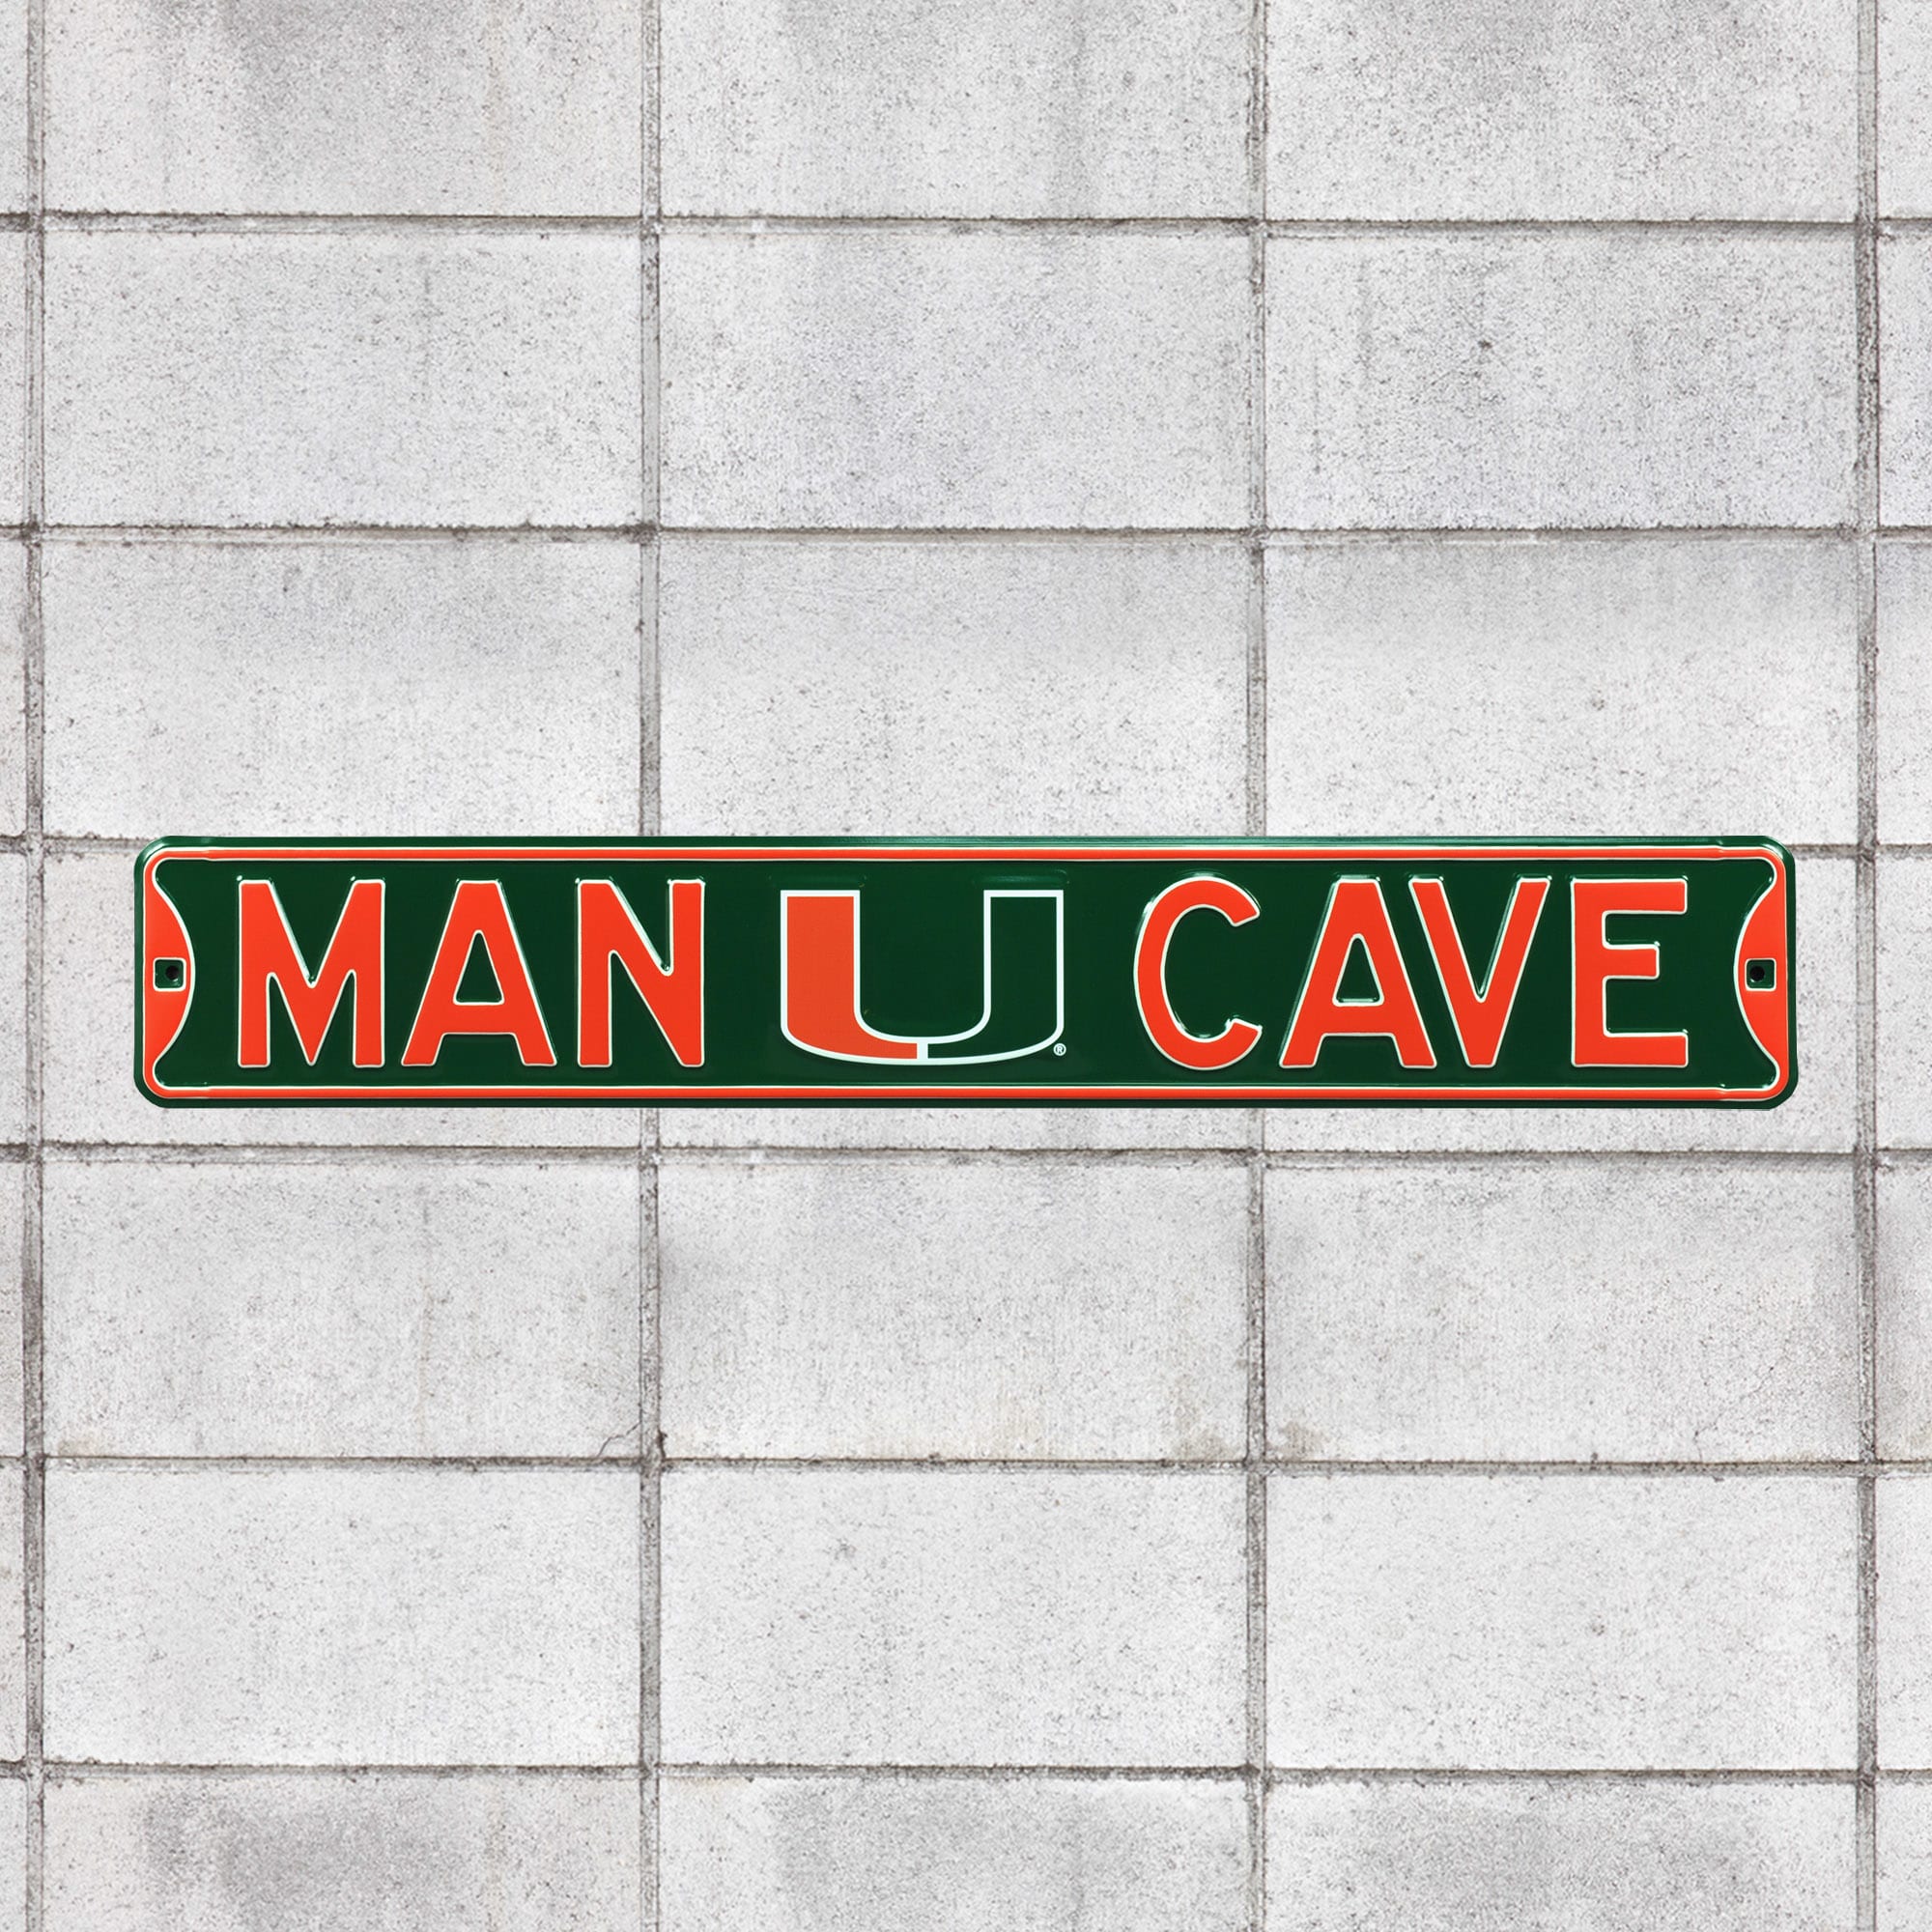 Miami Hurricanes: Man Cave - Officially Licensed Metal Street Sign 36.0"W x 6.0"H by Fathead | 100% Steel